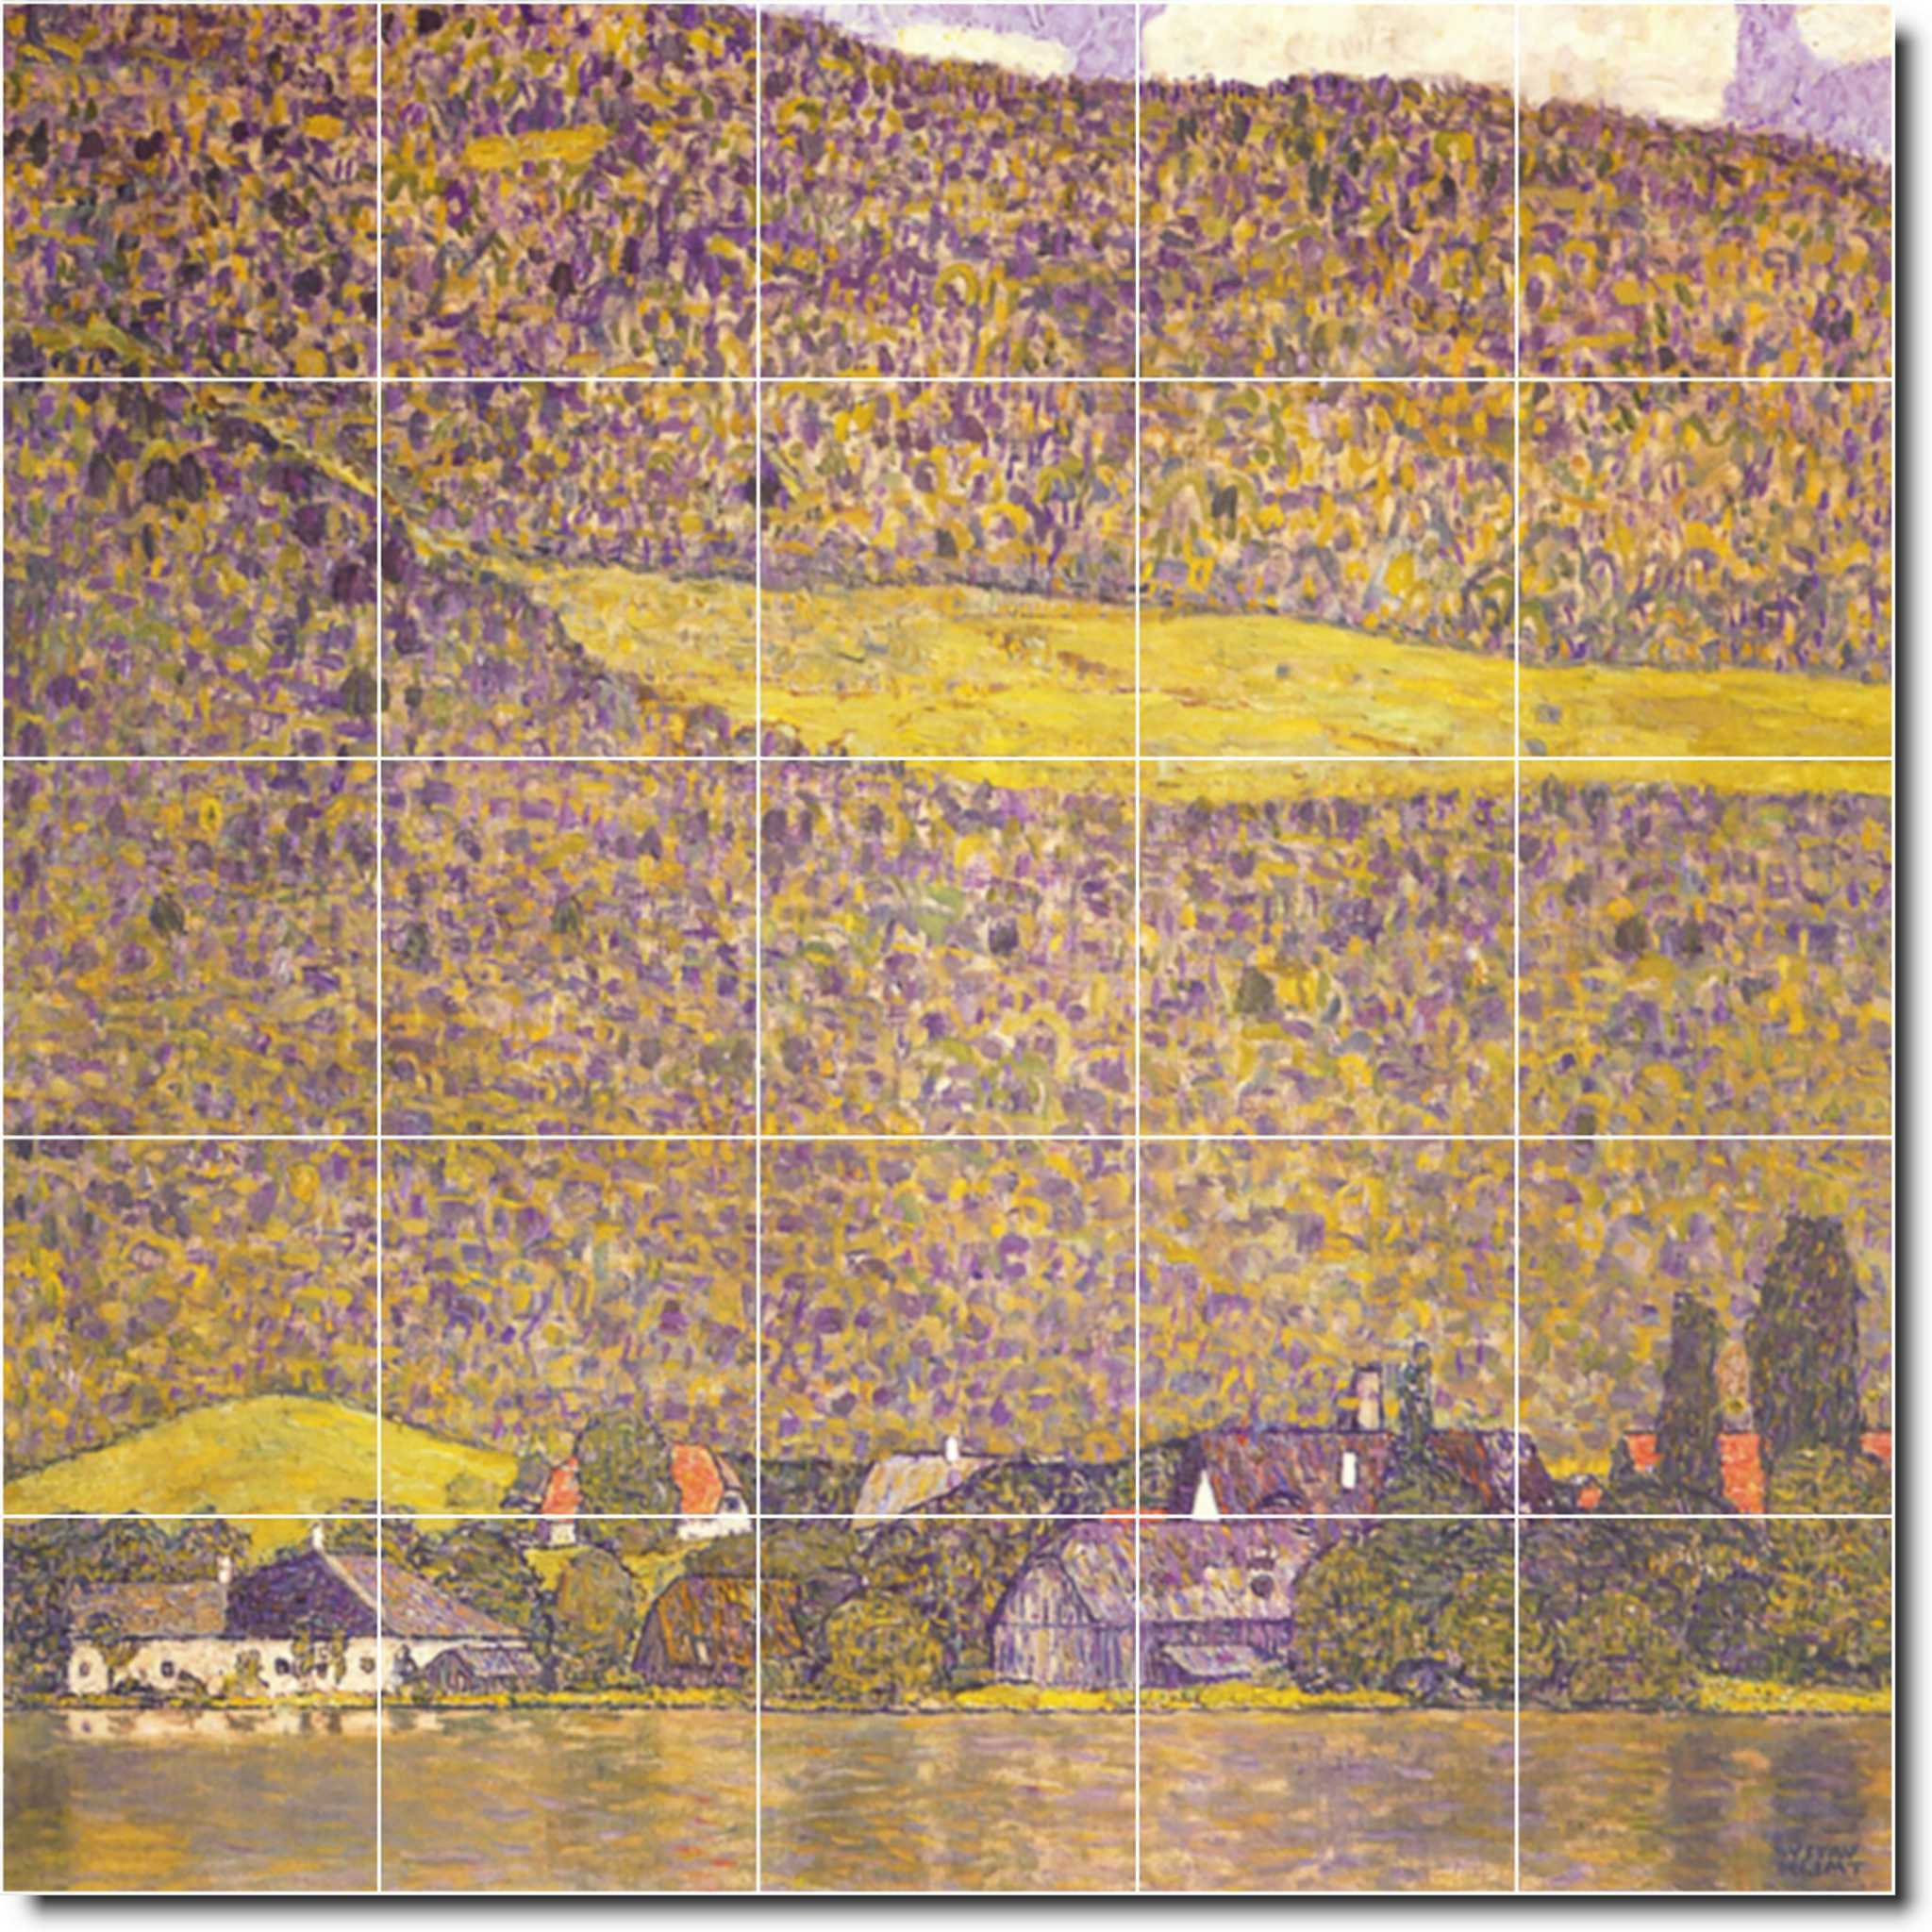 gustave klimt country painting ceramic tile mural p05047